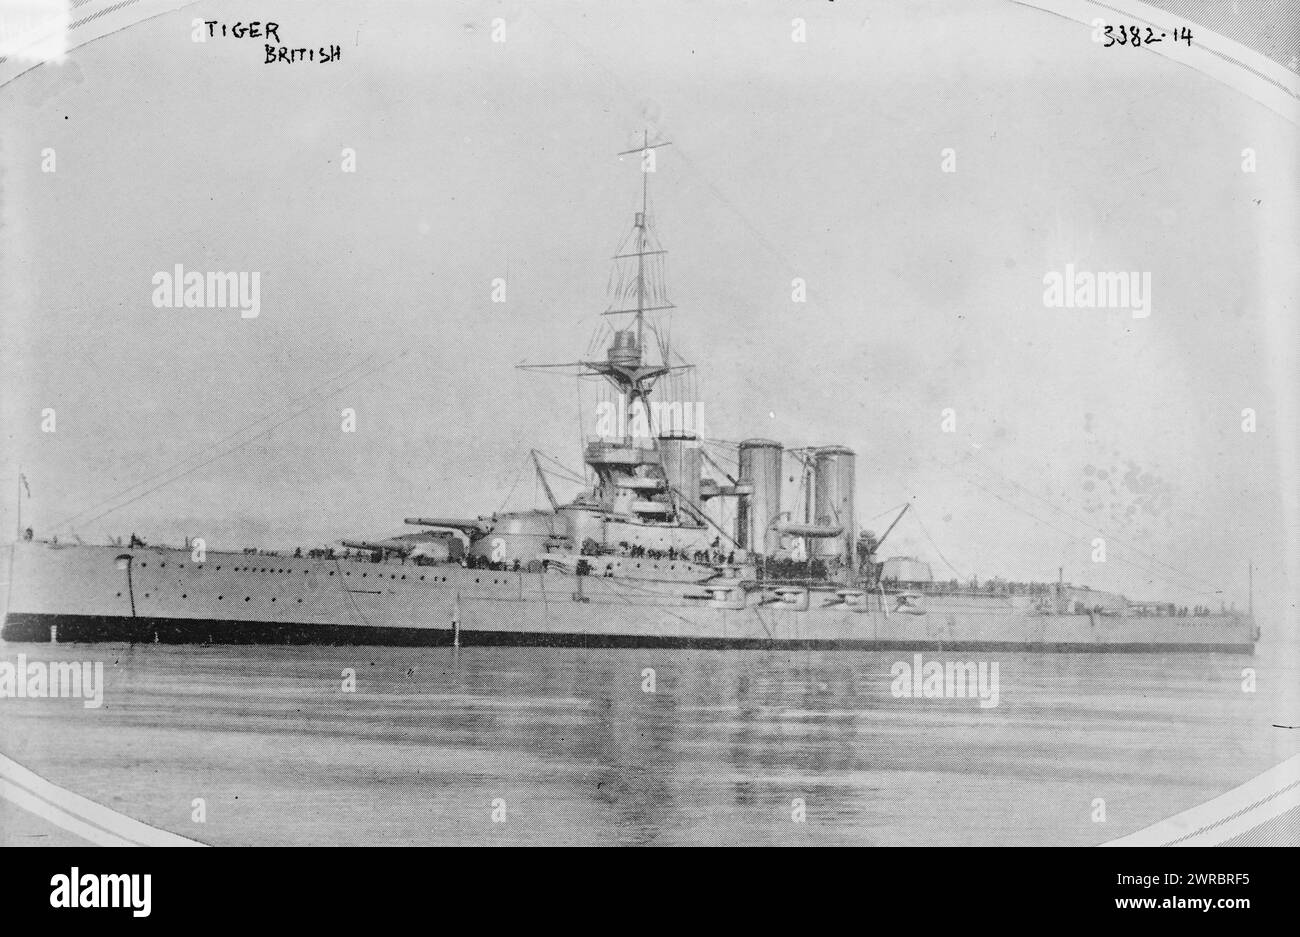 Tiger, British, Photograph shows the eleventh H.M.S. Tiger, a battlecruiser of the British Royal Navy which was launched in 1913 and served in World War I., between 1913 and ca. 1915, World War, 1914-1918, Glass negatives, 1 negative: glass Stock Photo